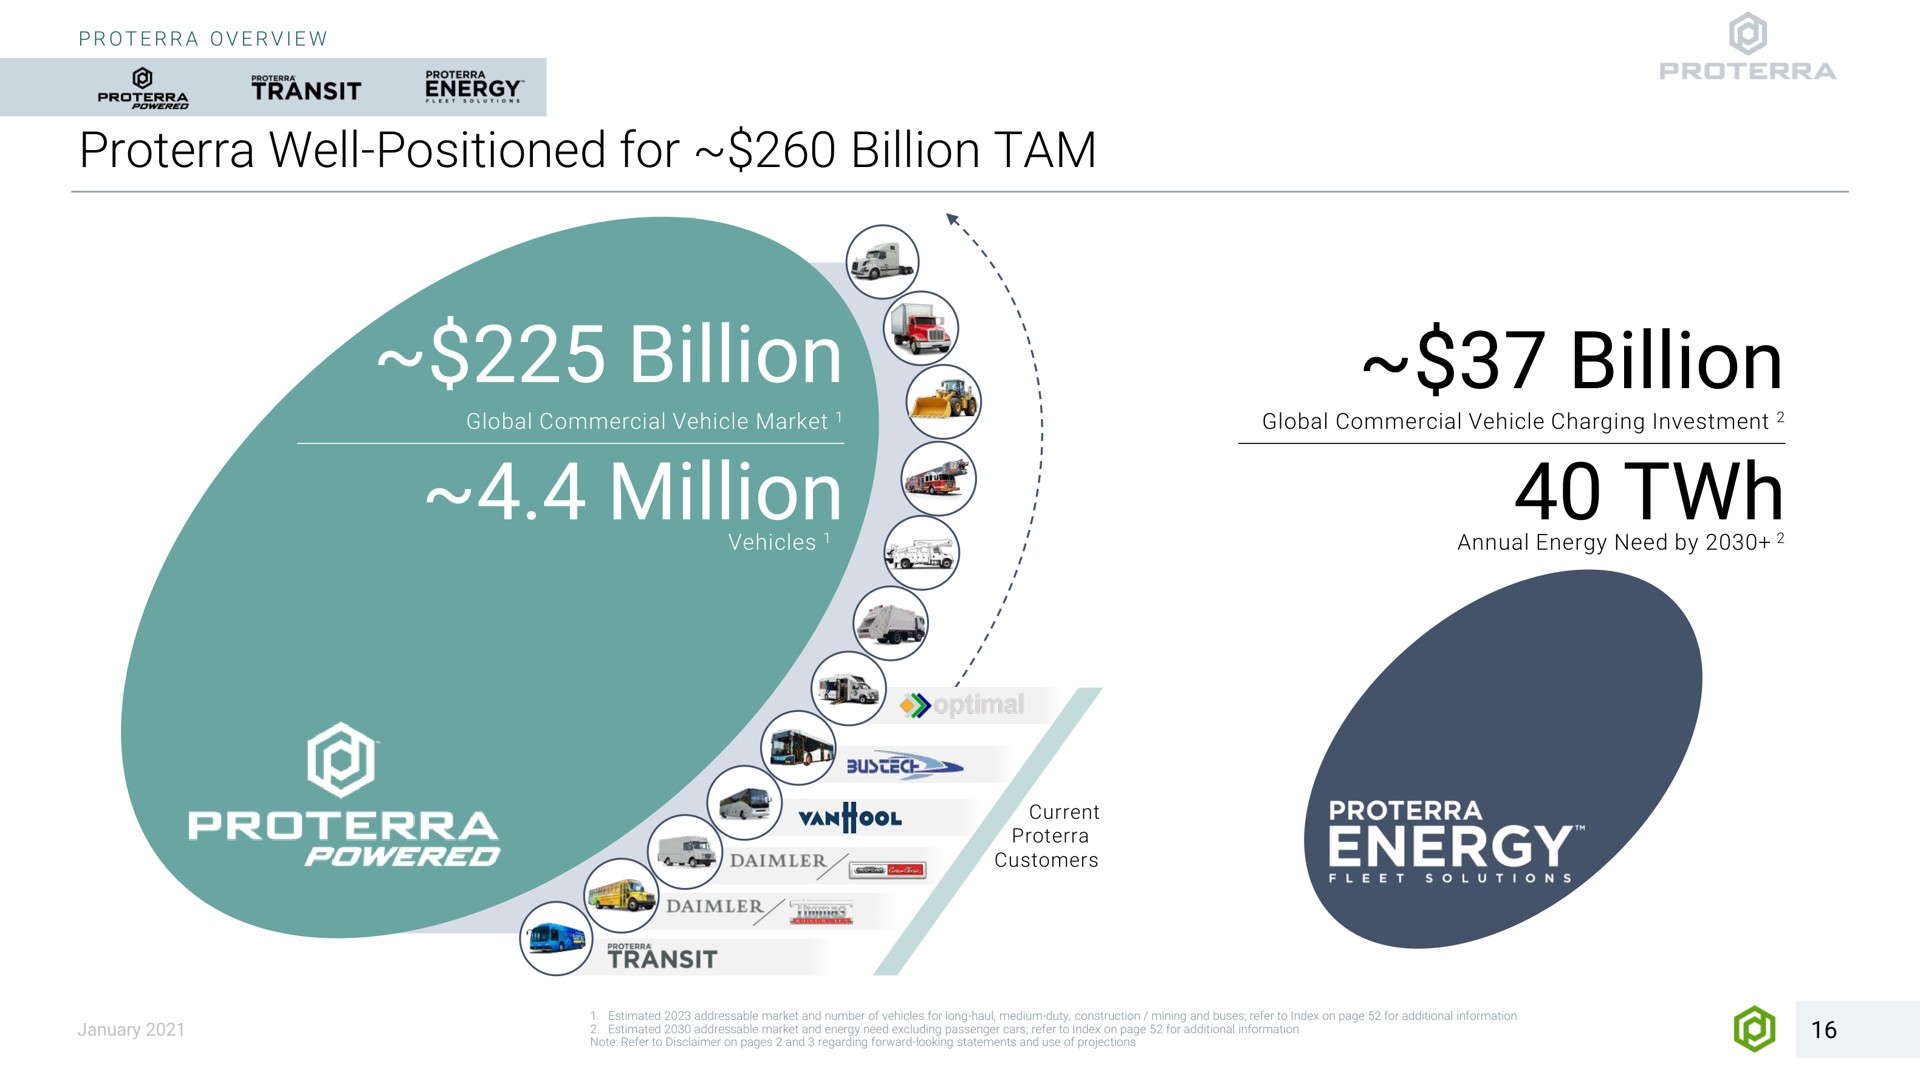 well positioned for billion tam billion million billion transit energy on global commercial vehicle charging investment vehicles powered annual energy need by ass energy transit | Proterra